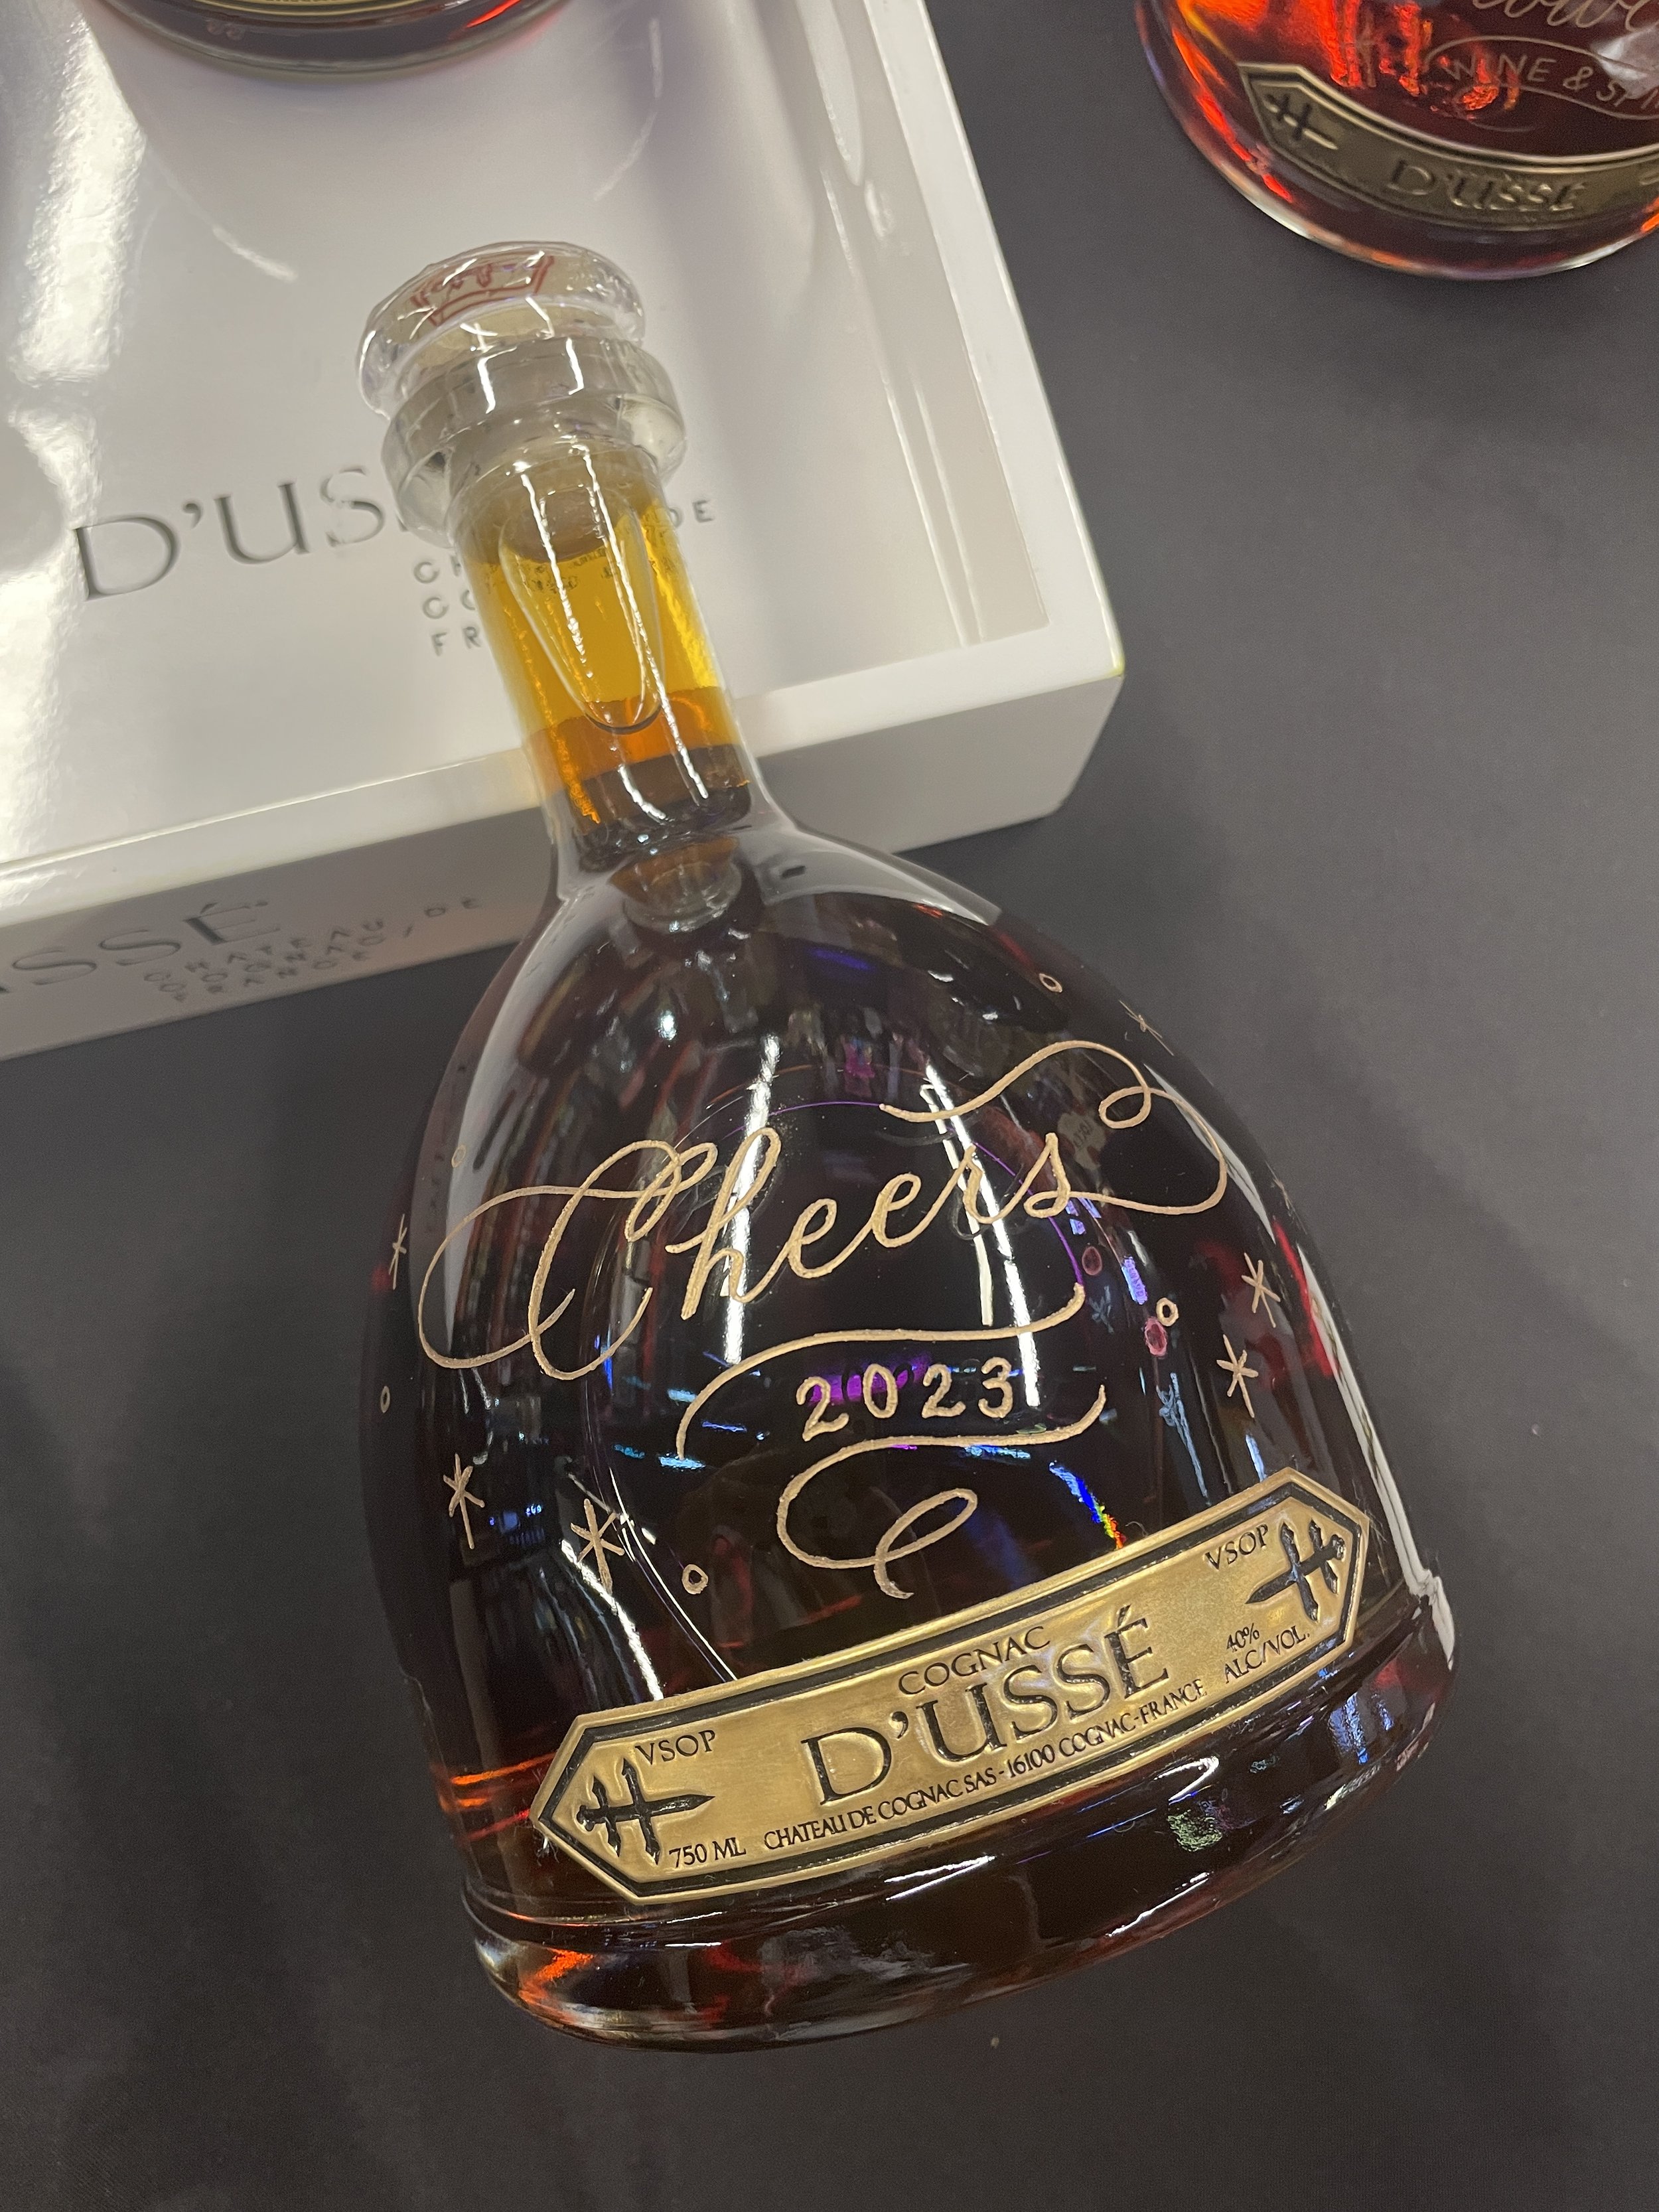 Holiday Engraving Event - D'usse (Pasadena)